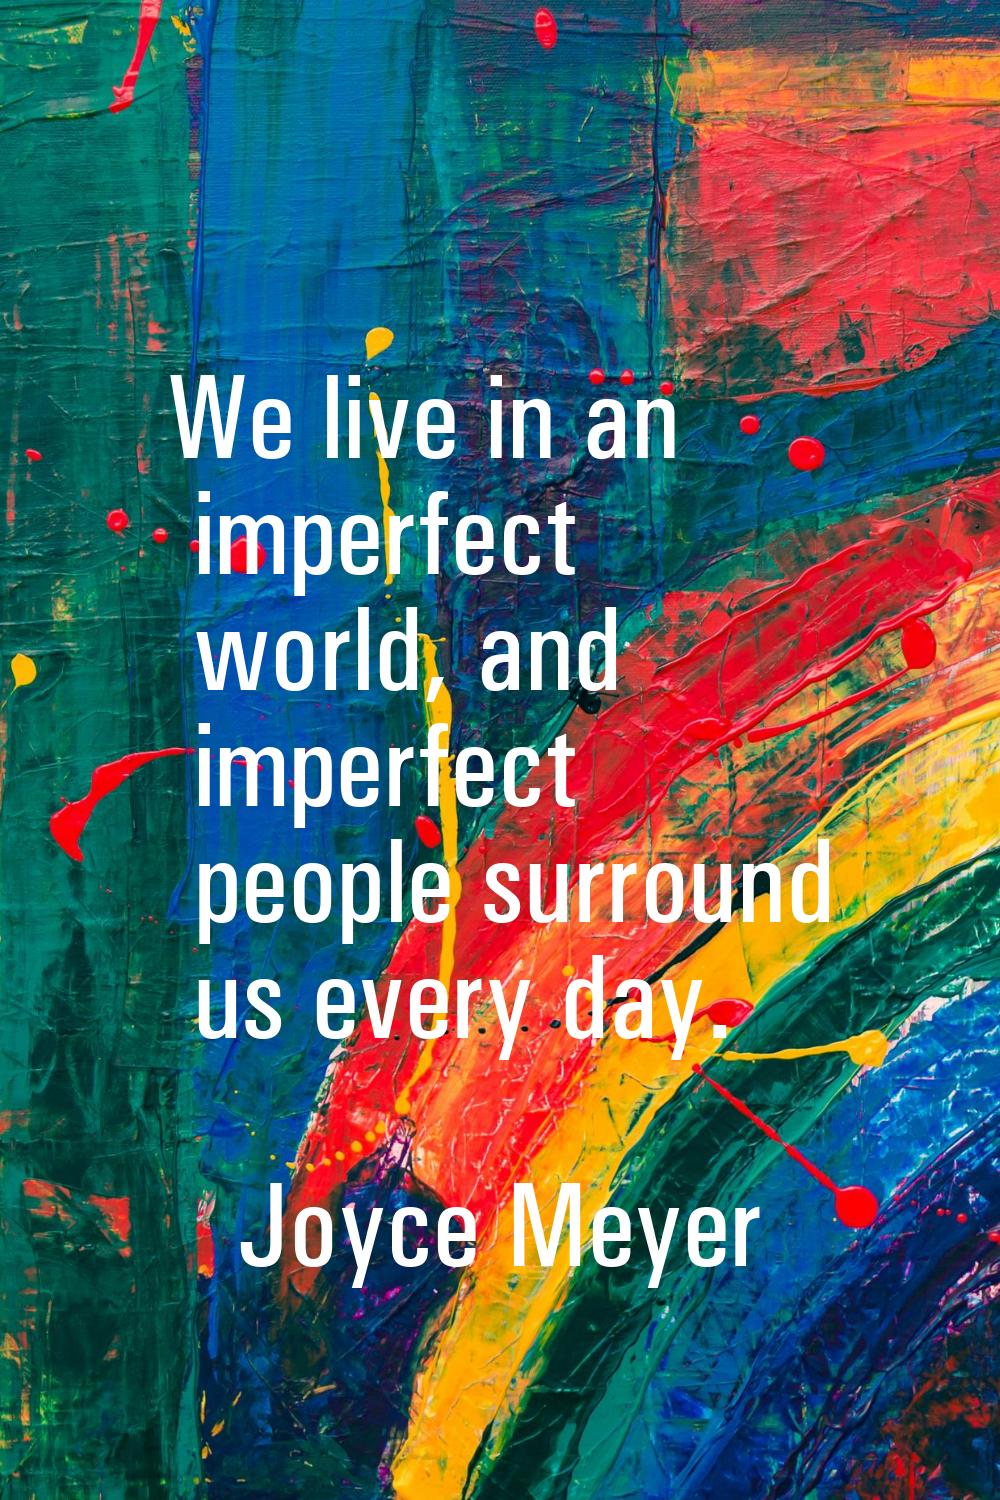 We live in an imperfect world, and imperfect people surround us every day.